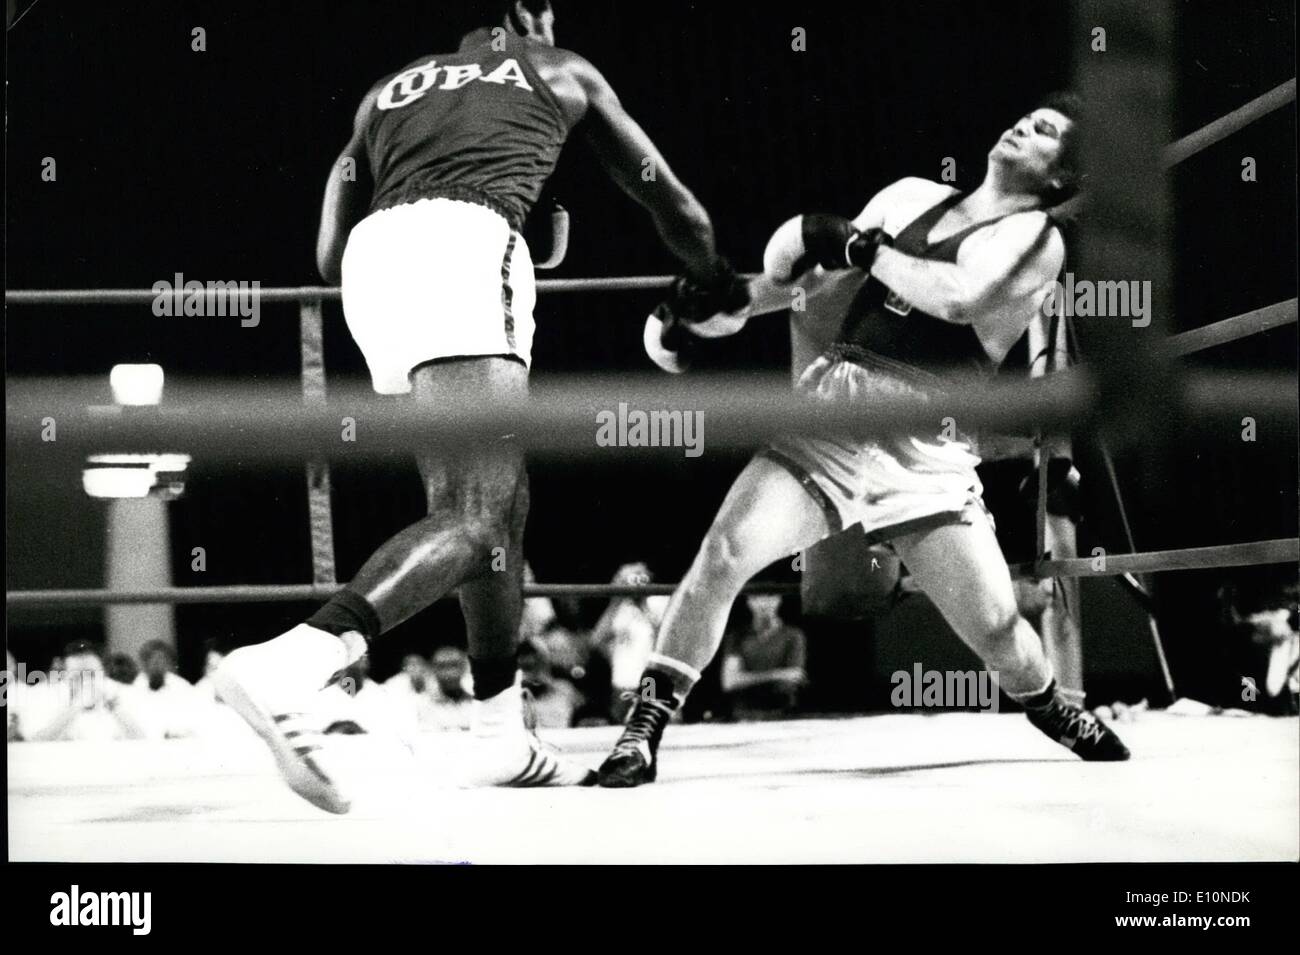 Aug. 08, 1973 - Stevenson Beats Czech Star Sommer: Santiago De Cuba Olympic heavyweight Champion Teofilo Stevenson knocked out Petr Sommer, three times champion of Czechoslovakia, in the ''Giraldo Cordova Cardin'' International Boxing Tournament here. Sommer, the only boxer to beat Stevenson twice in 1971, was felled in the first round by a fierce right from the Cuban. The tournament is being held as part of the festivities to mark the 20th anniversary of the attack on the Moncada barracks, which marked the beginning of the armed insurrection against the Fulgencio Batista dictatorship Stock Photo